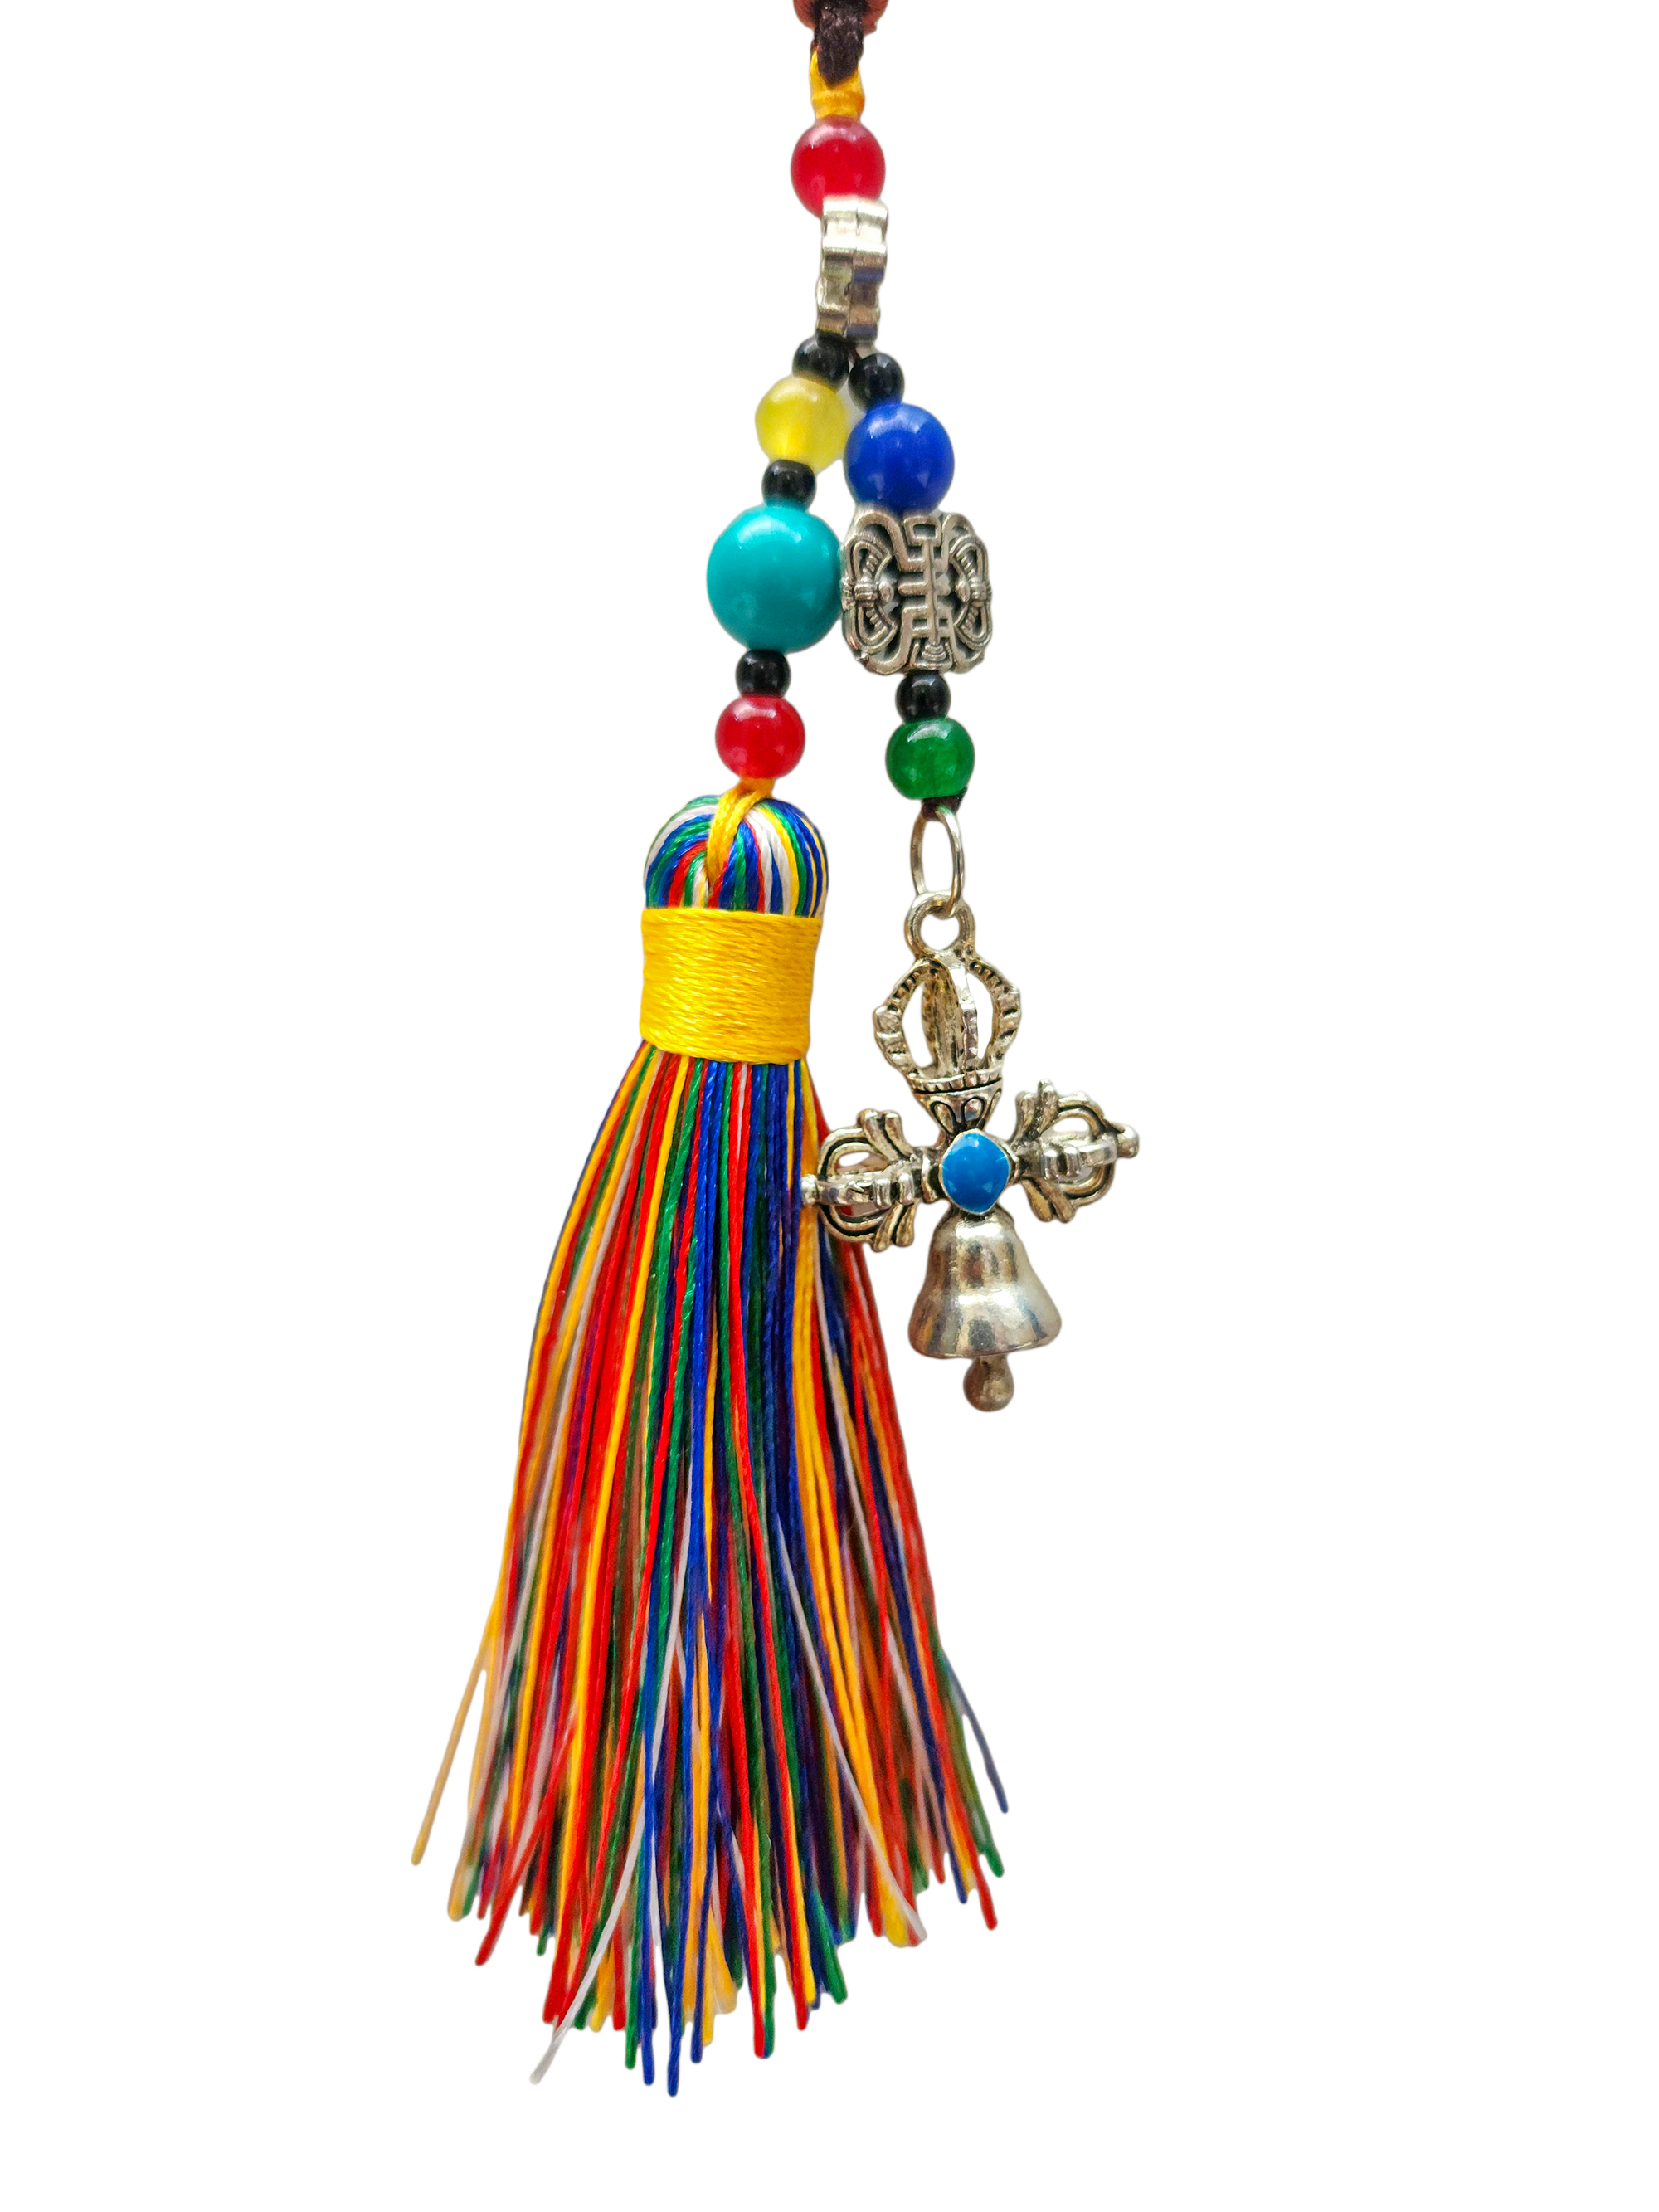 Buddhist Ritual Amulet Hanging With Bell And Dorje, For Wall, Altar, Bags And Keyring